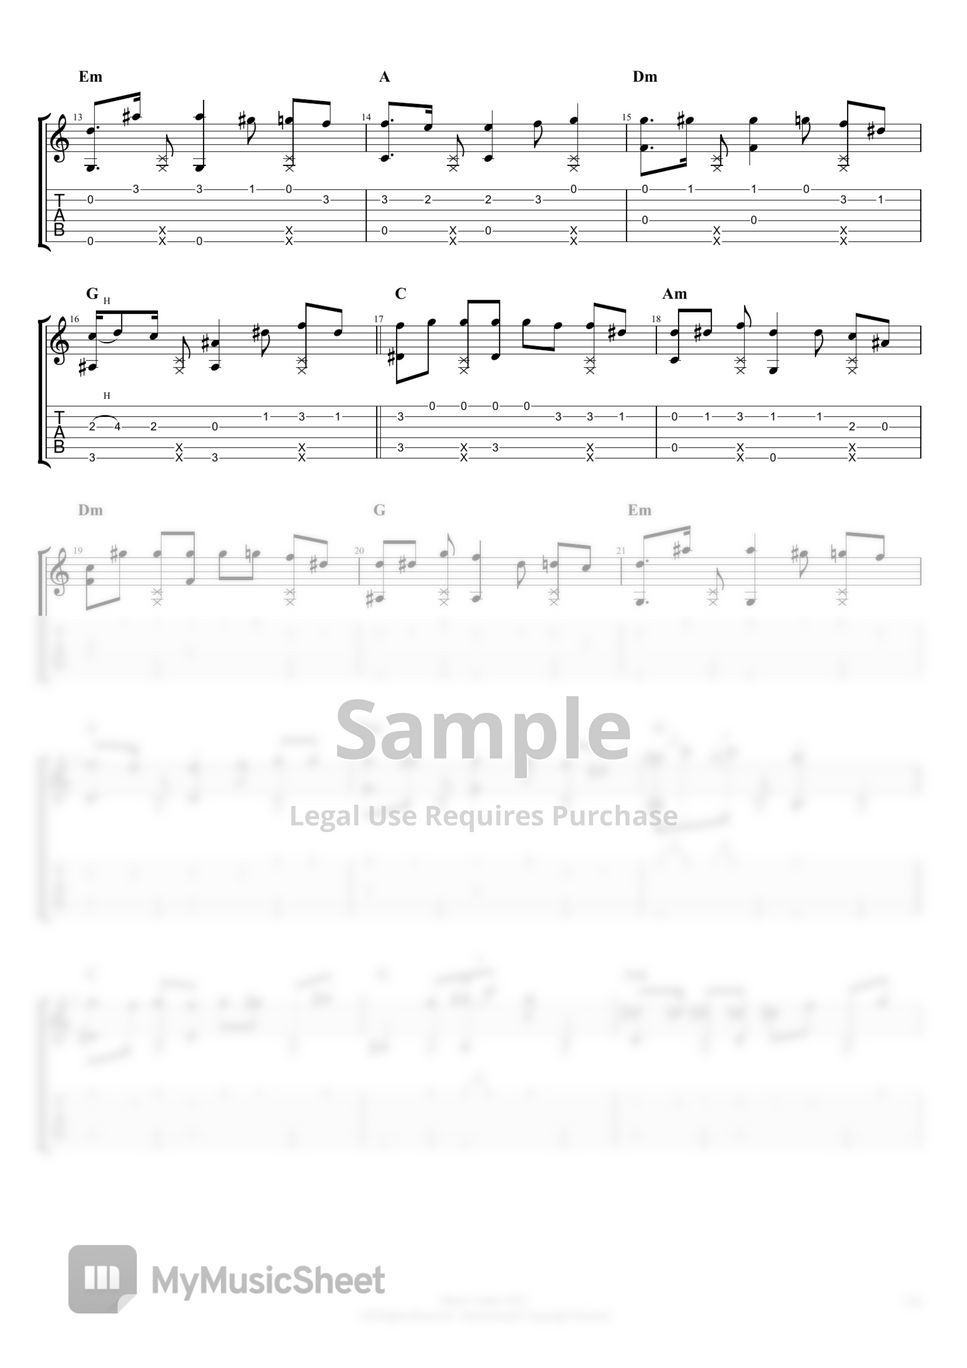 Ysabelle Cuevas (Fingerstyle Guitar TABS) - I Like You So Much, You'll Know It by Music Nodes